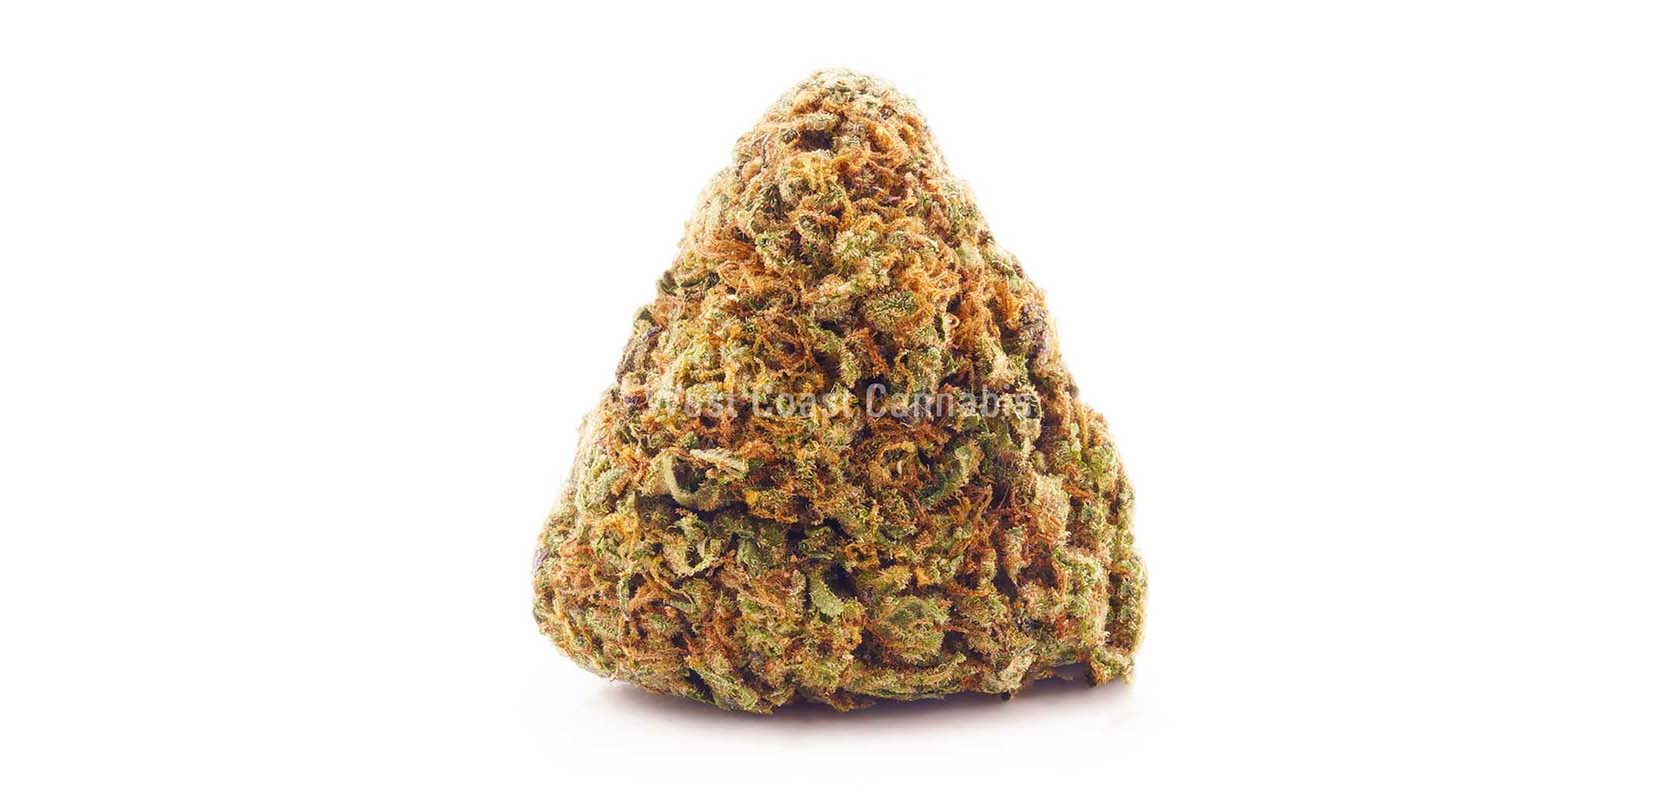 Sundae Driver weed online Canada. Buy weed online, edibles online, and budget bud dispensary weed.